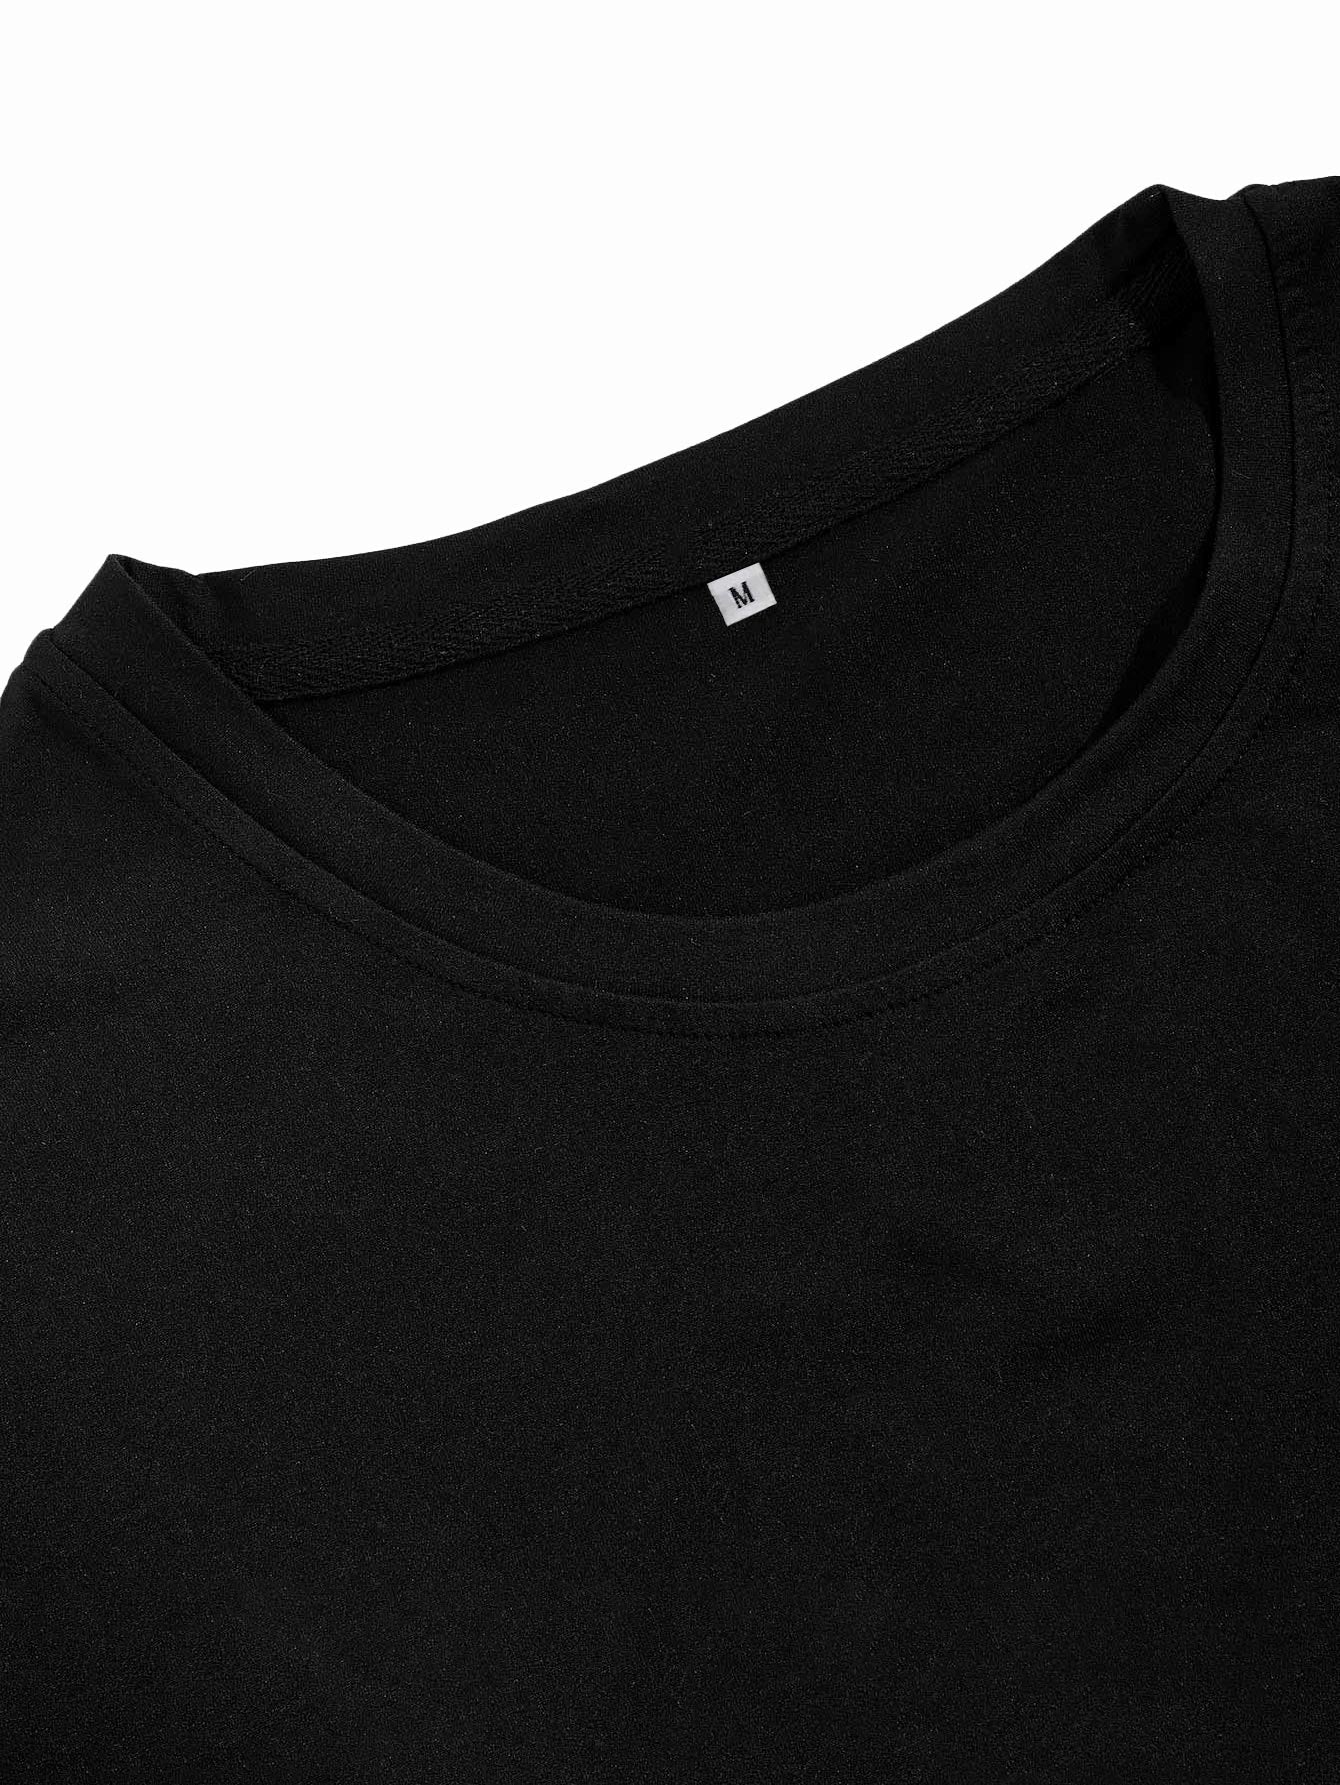 Men's Casual Solid Basic Tee 2pcs - Round Neck, Short Sleeve, Regular Fit